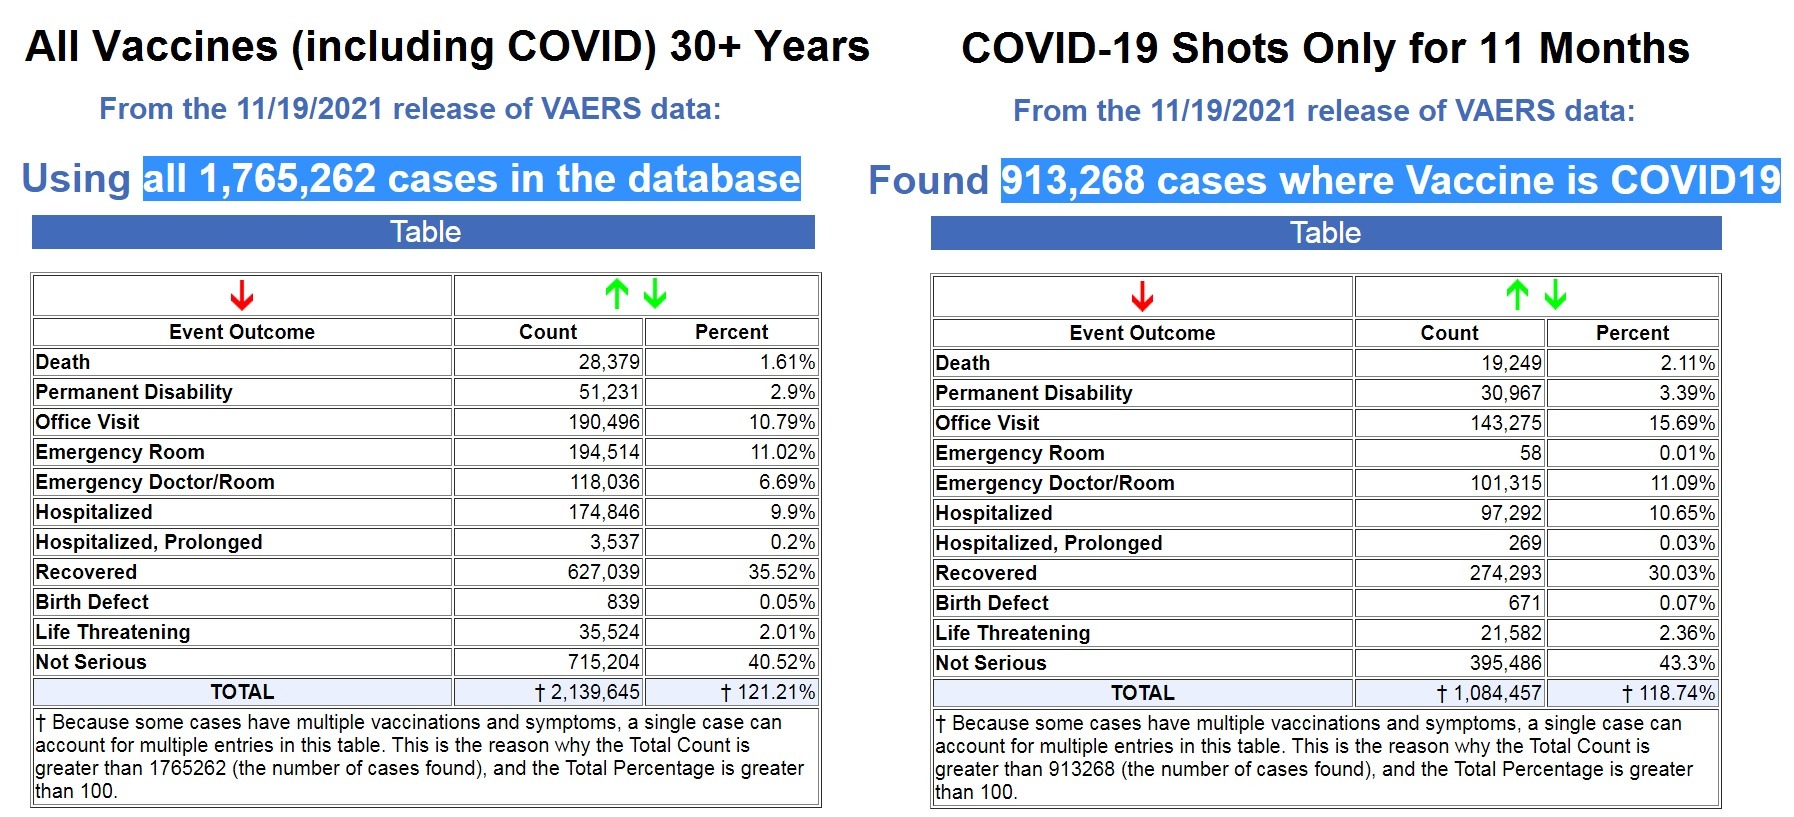 more than 50% of all vaccine adverse reactions reported for past 30+ years have occurred in past 11 months following covid 19 shots